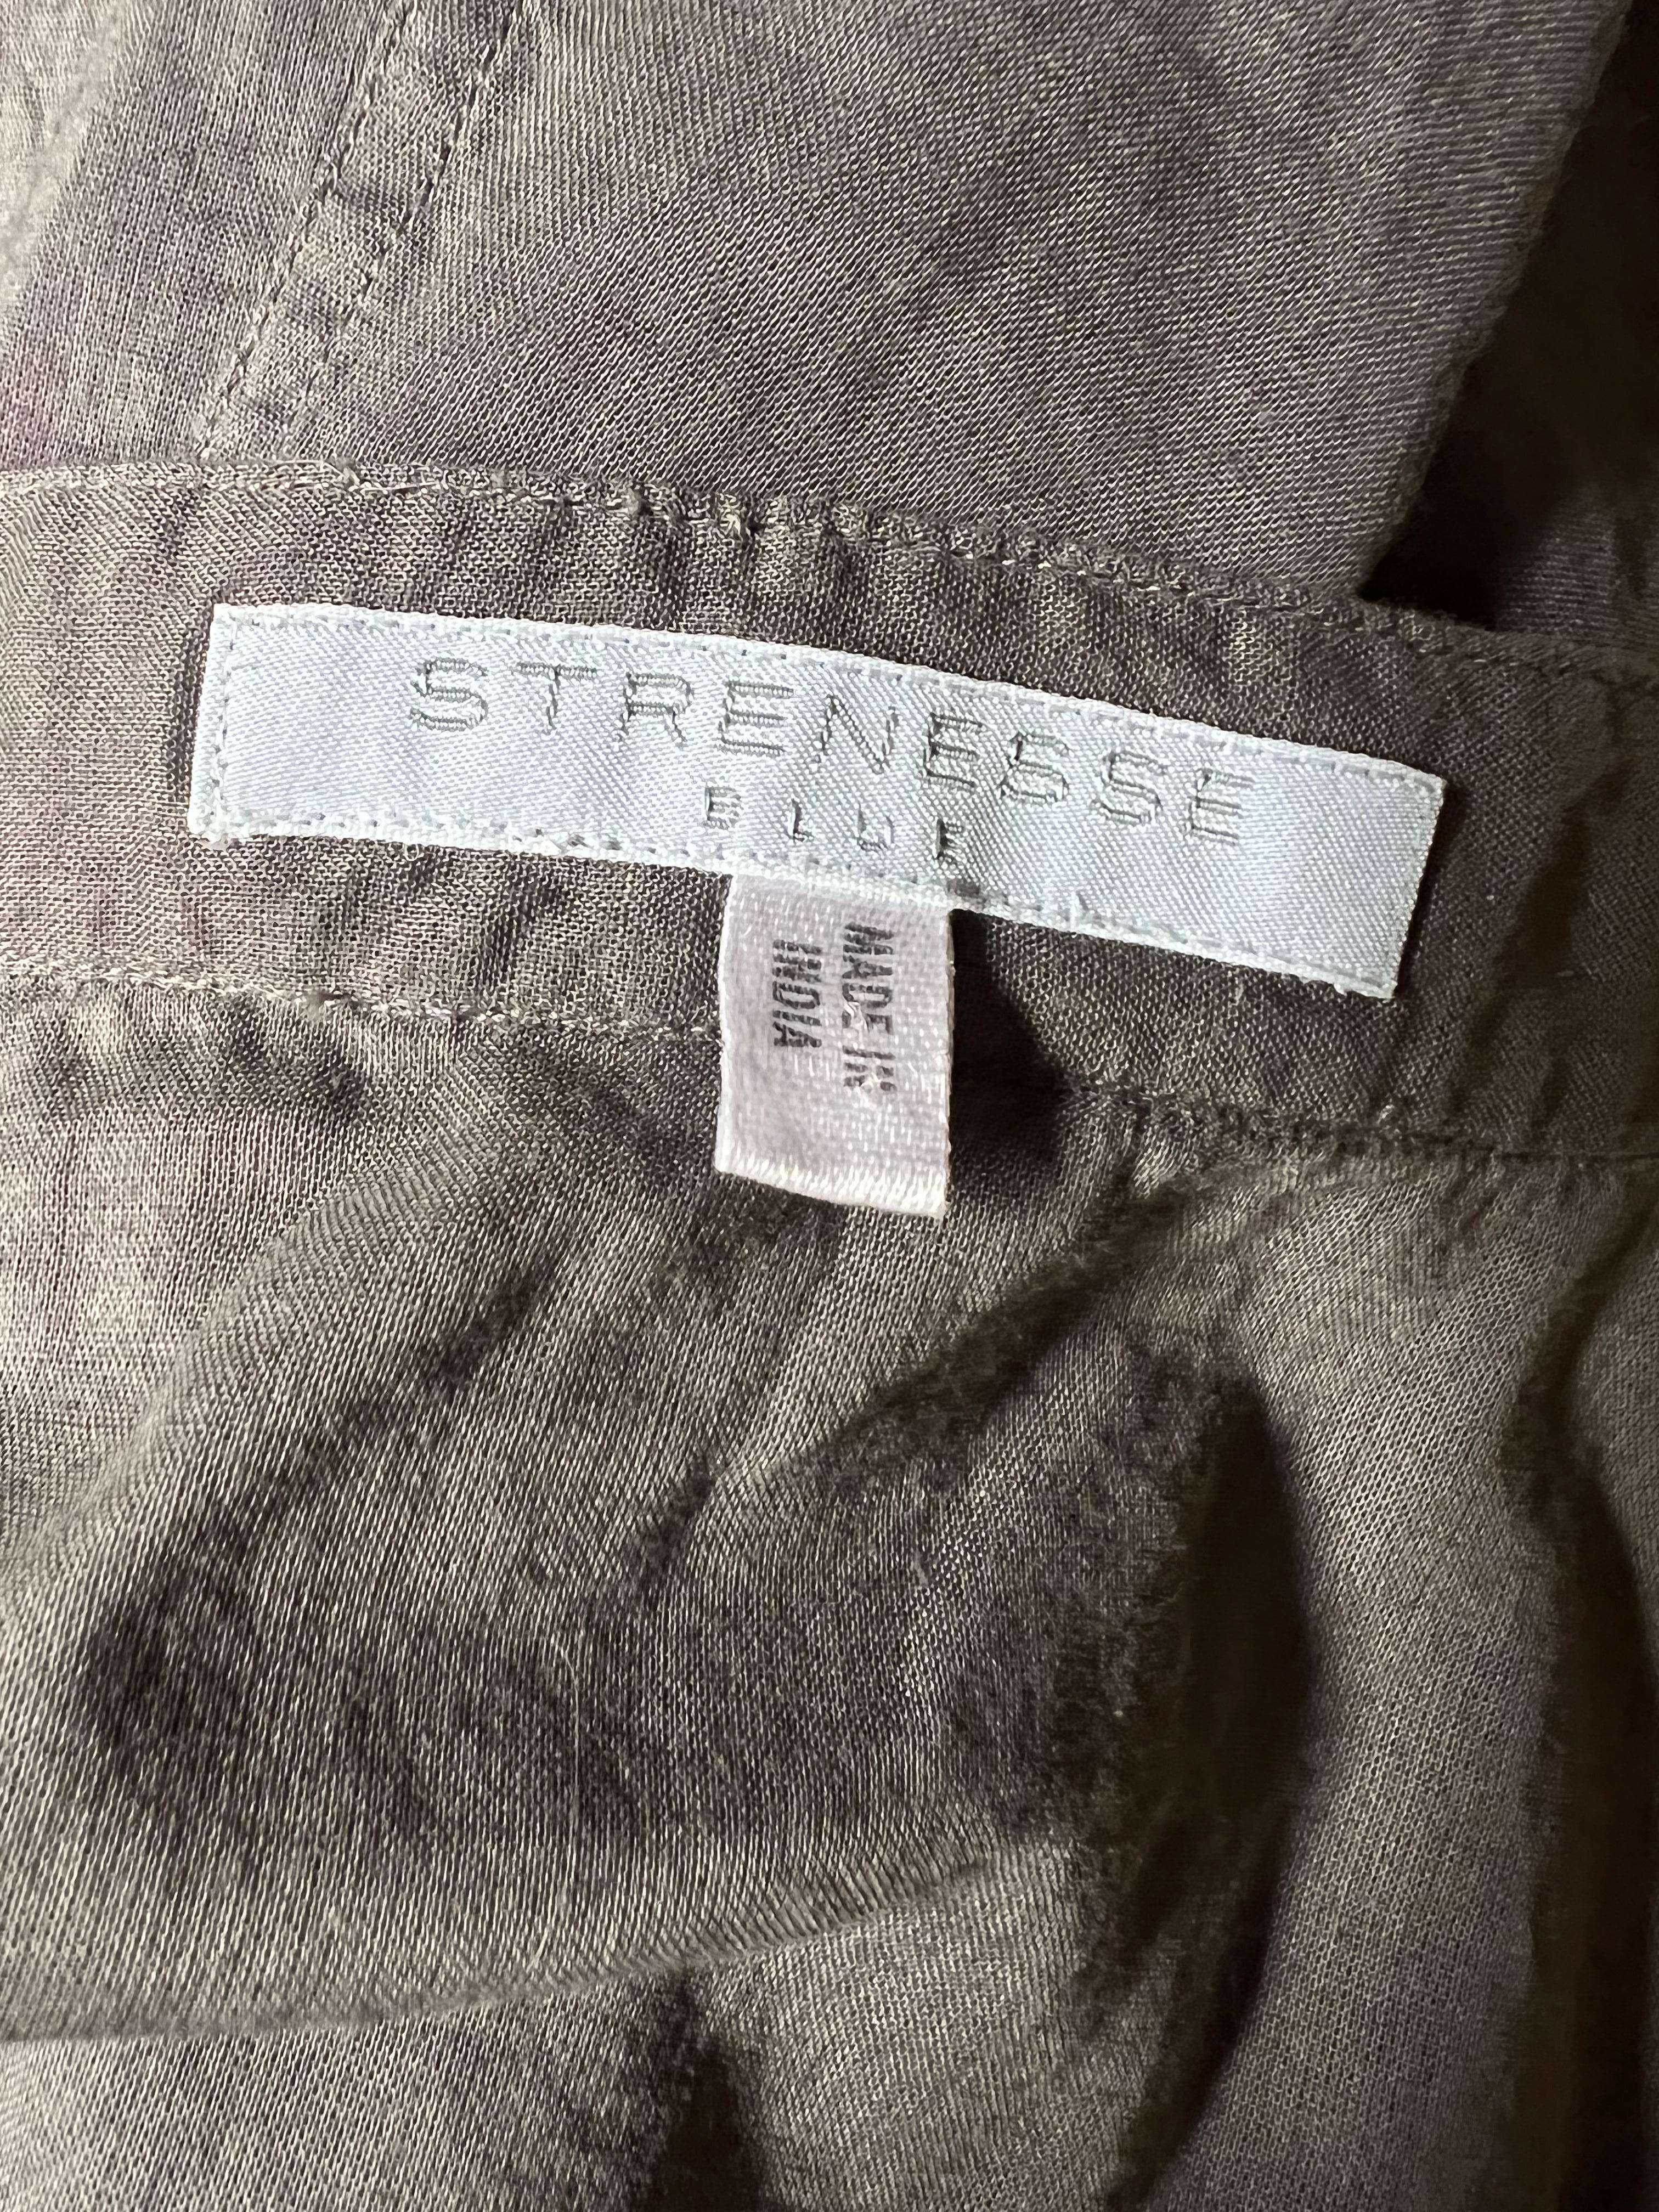 Strenesse  Blue Grey Cotton Blouse Top, Size 4 For Sale 1